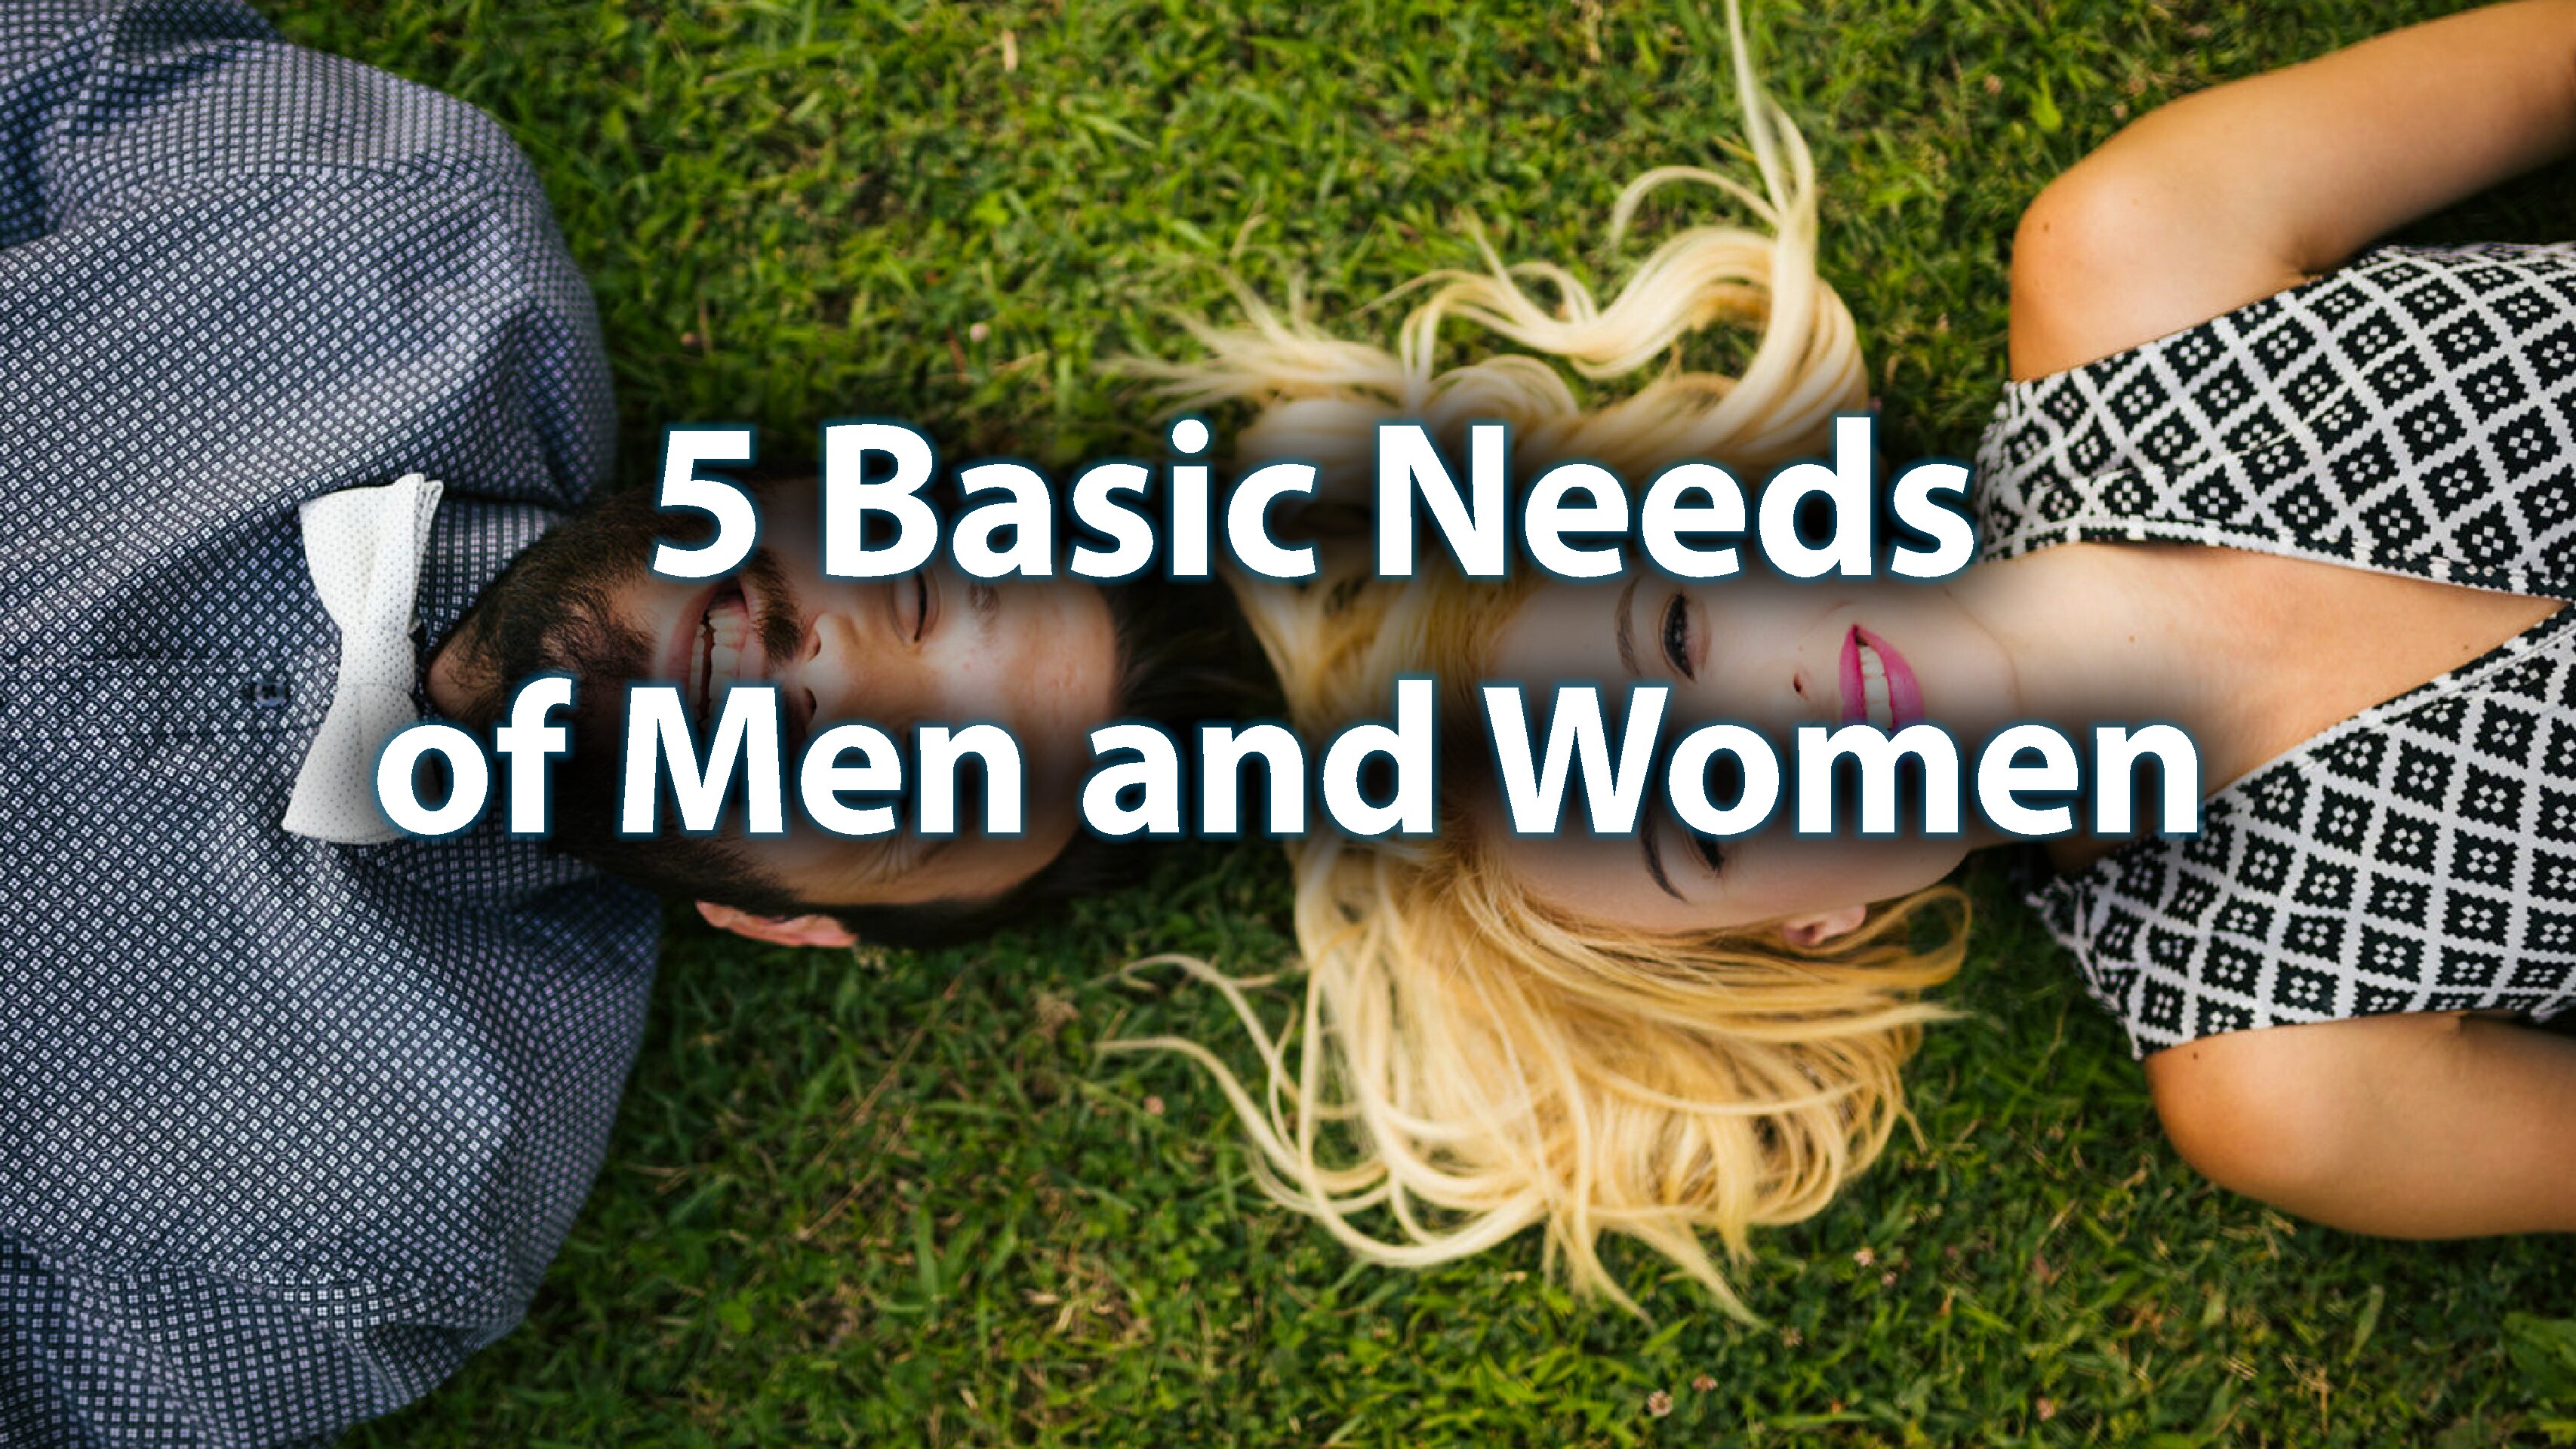 Day 14: 5 Basic Needs of Men and Women